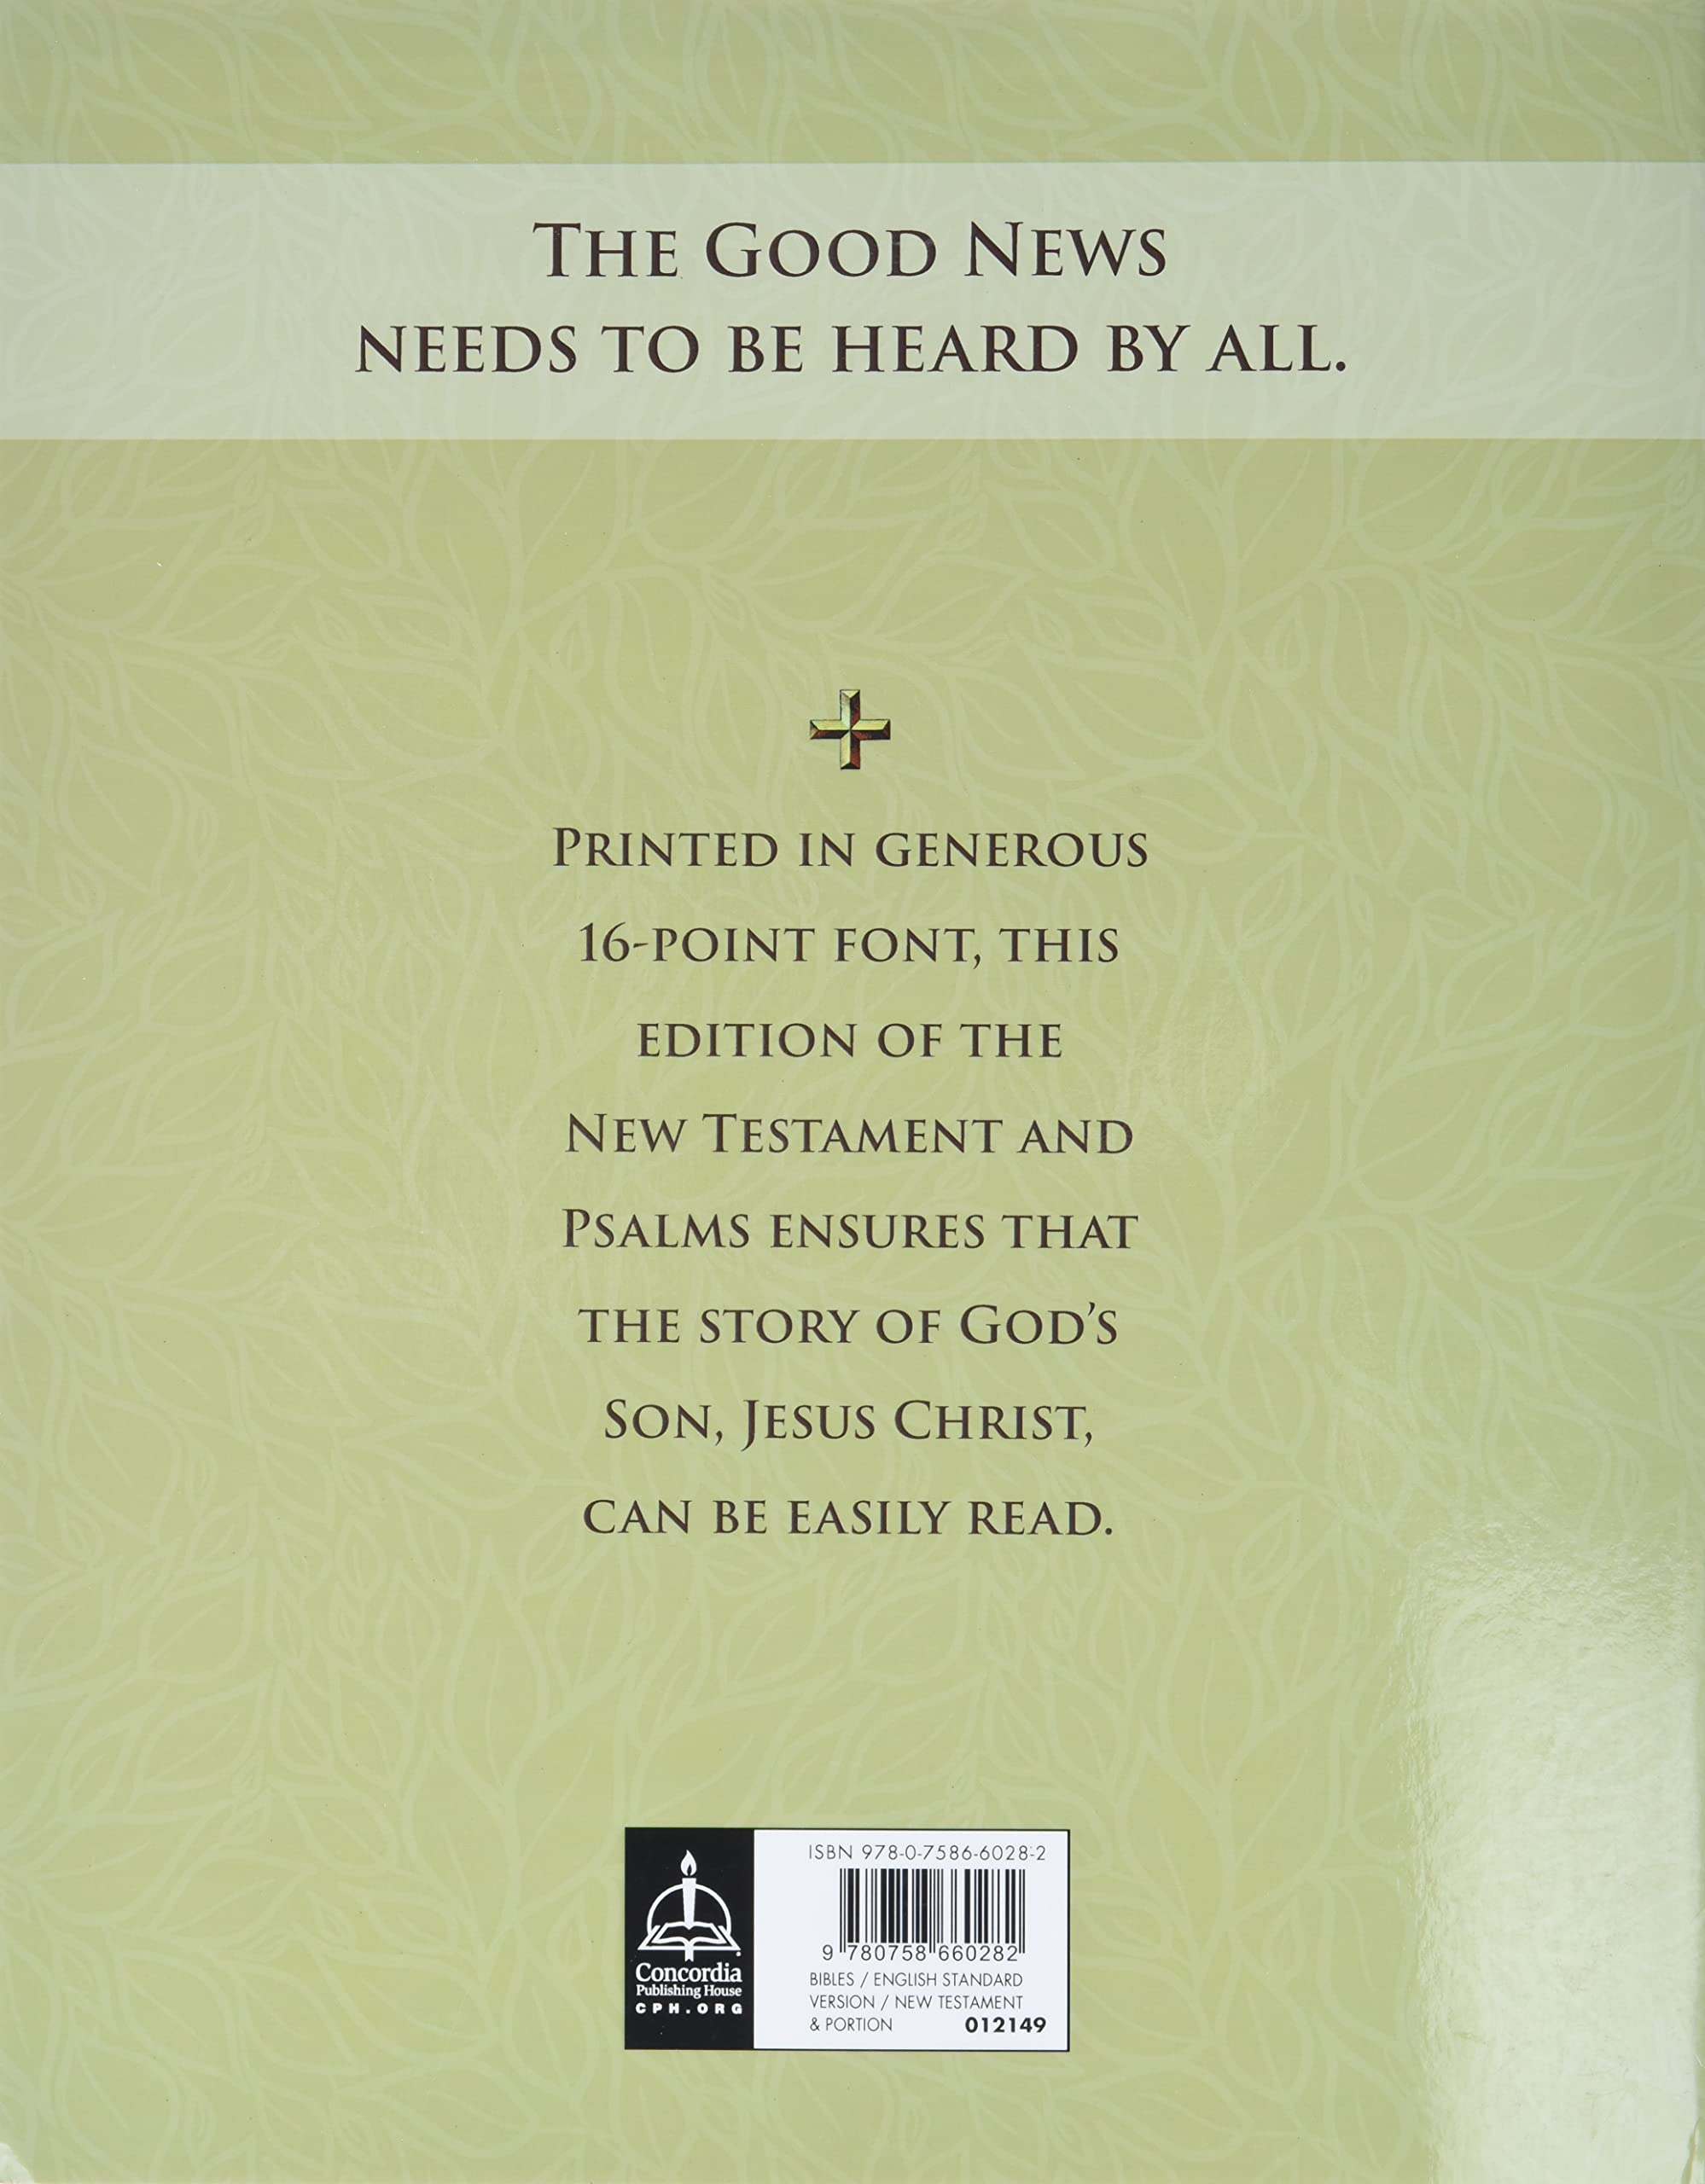 New Testament with Psalms: Giant Print ESV